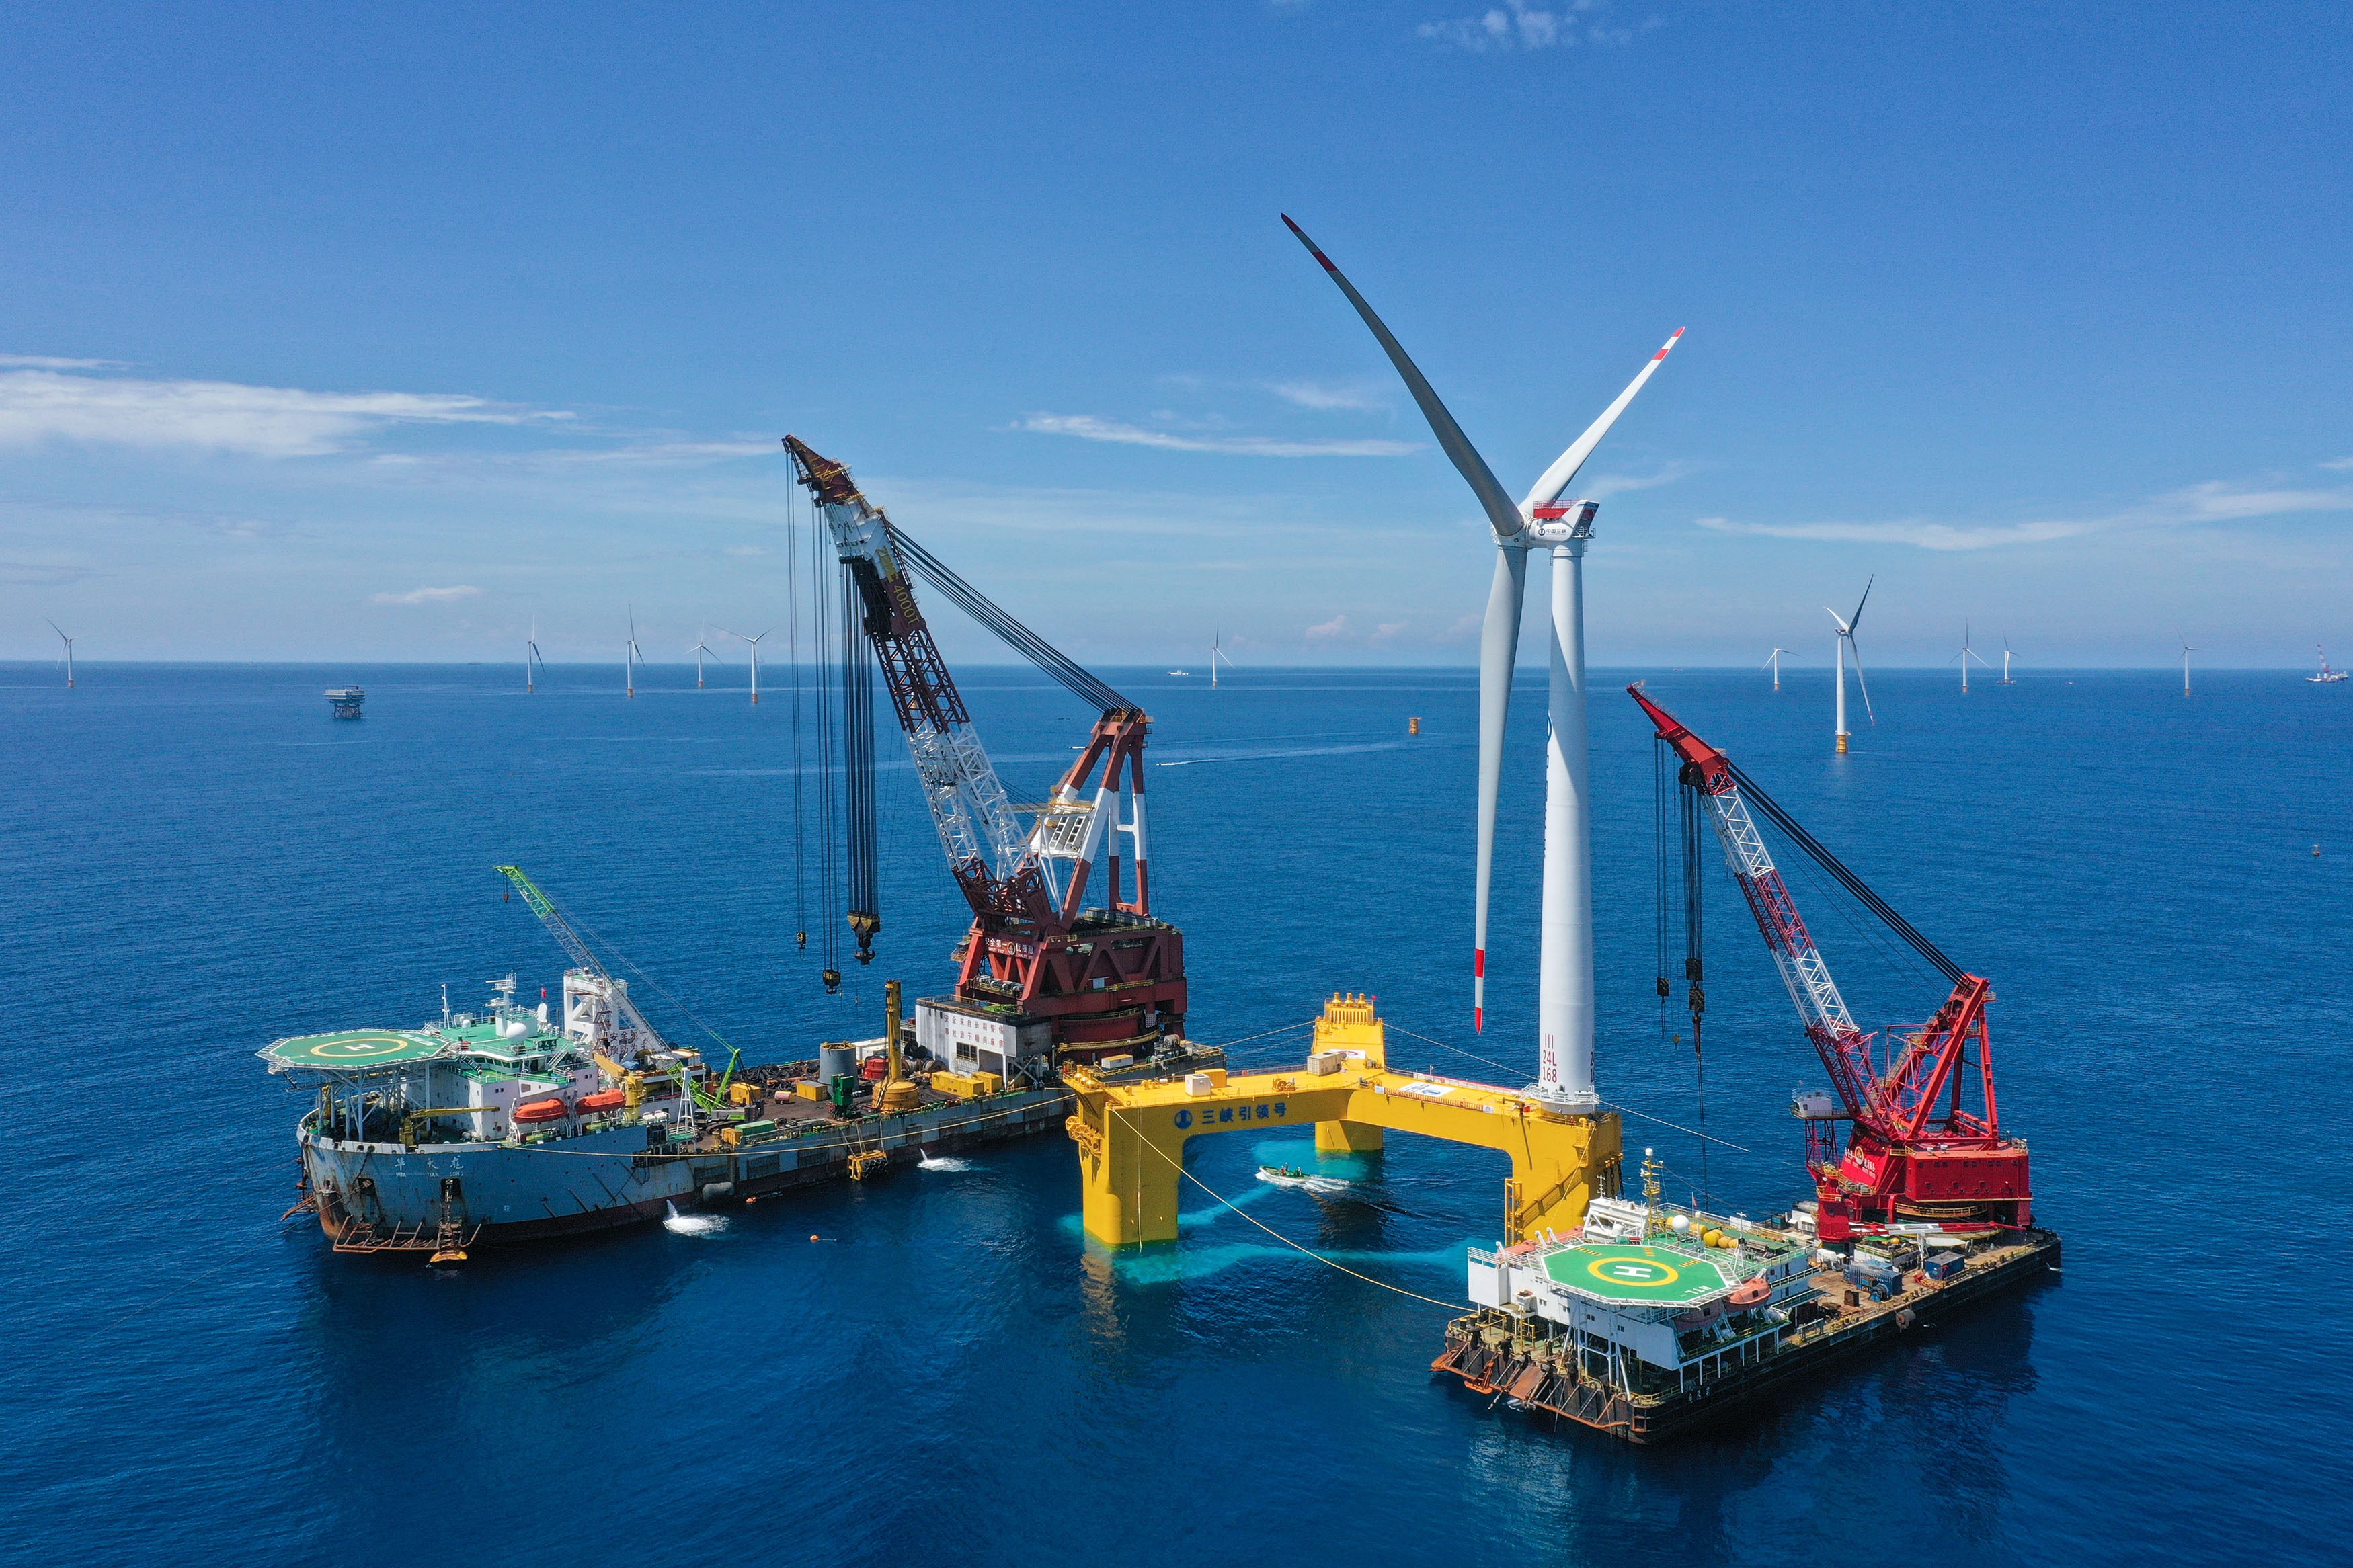 Ships assemble floating offshore wind turbine